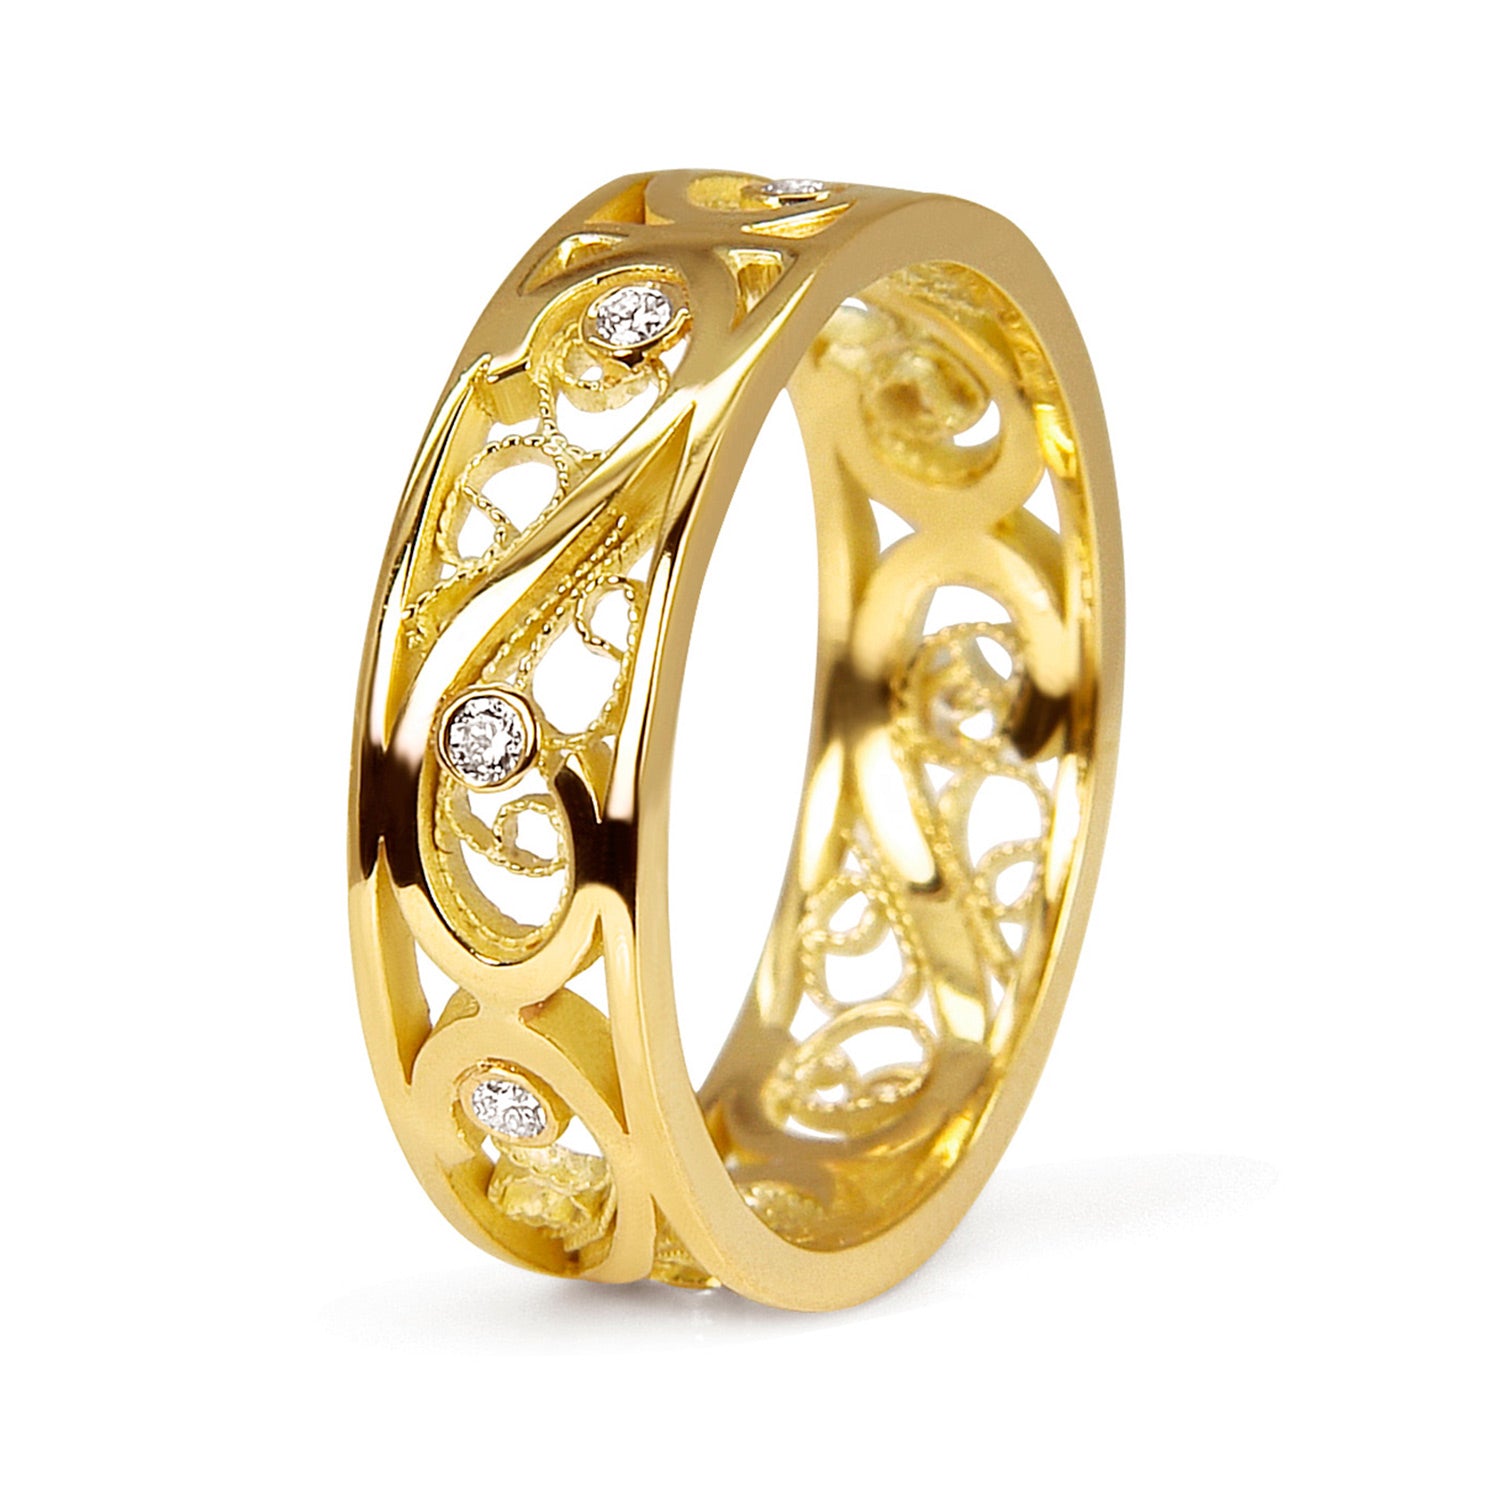 Bespoke Tamsin wedding ring - recycled yellow gold, conflict-free diamonds and filigree technique